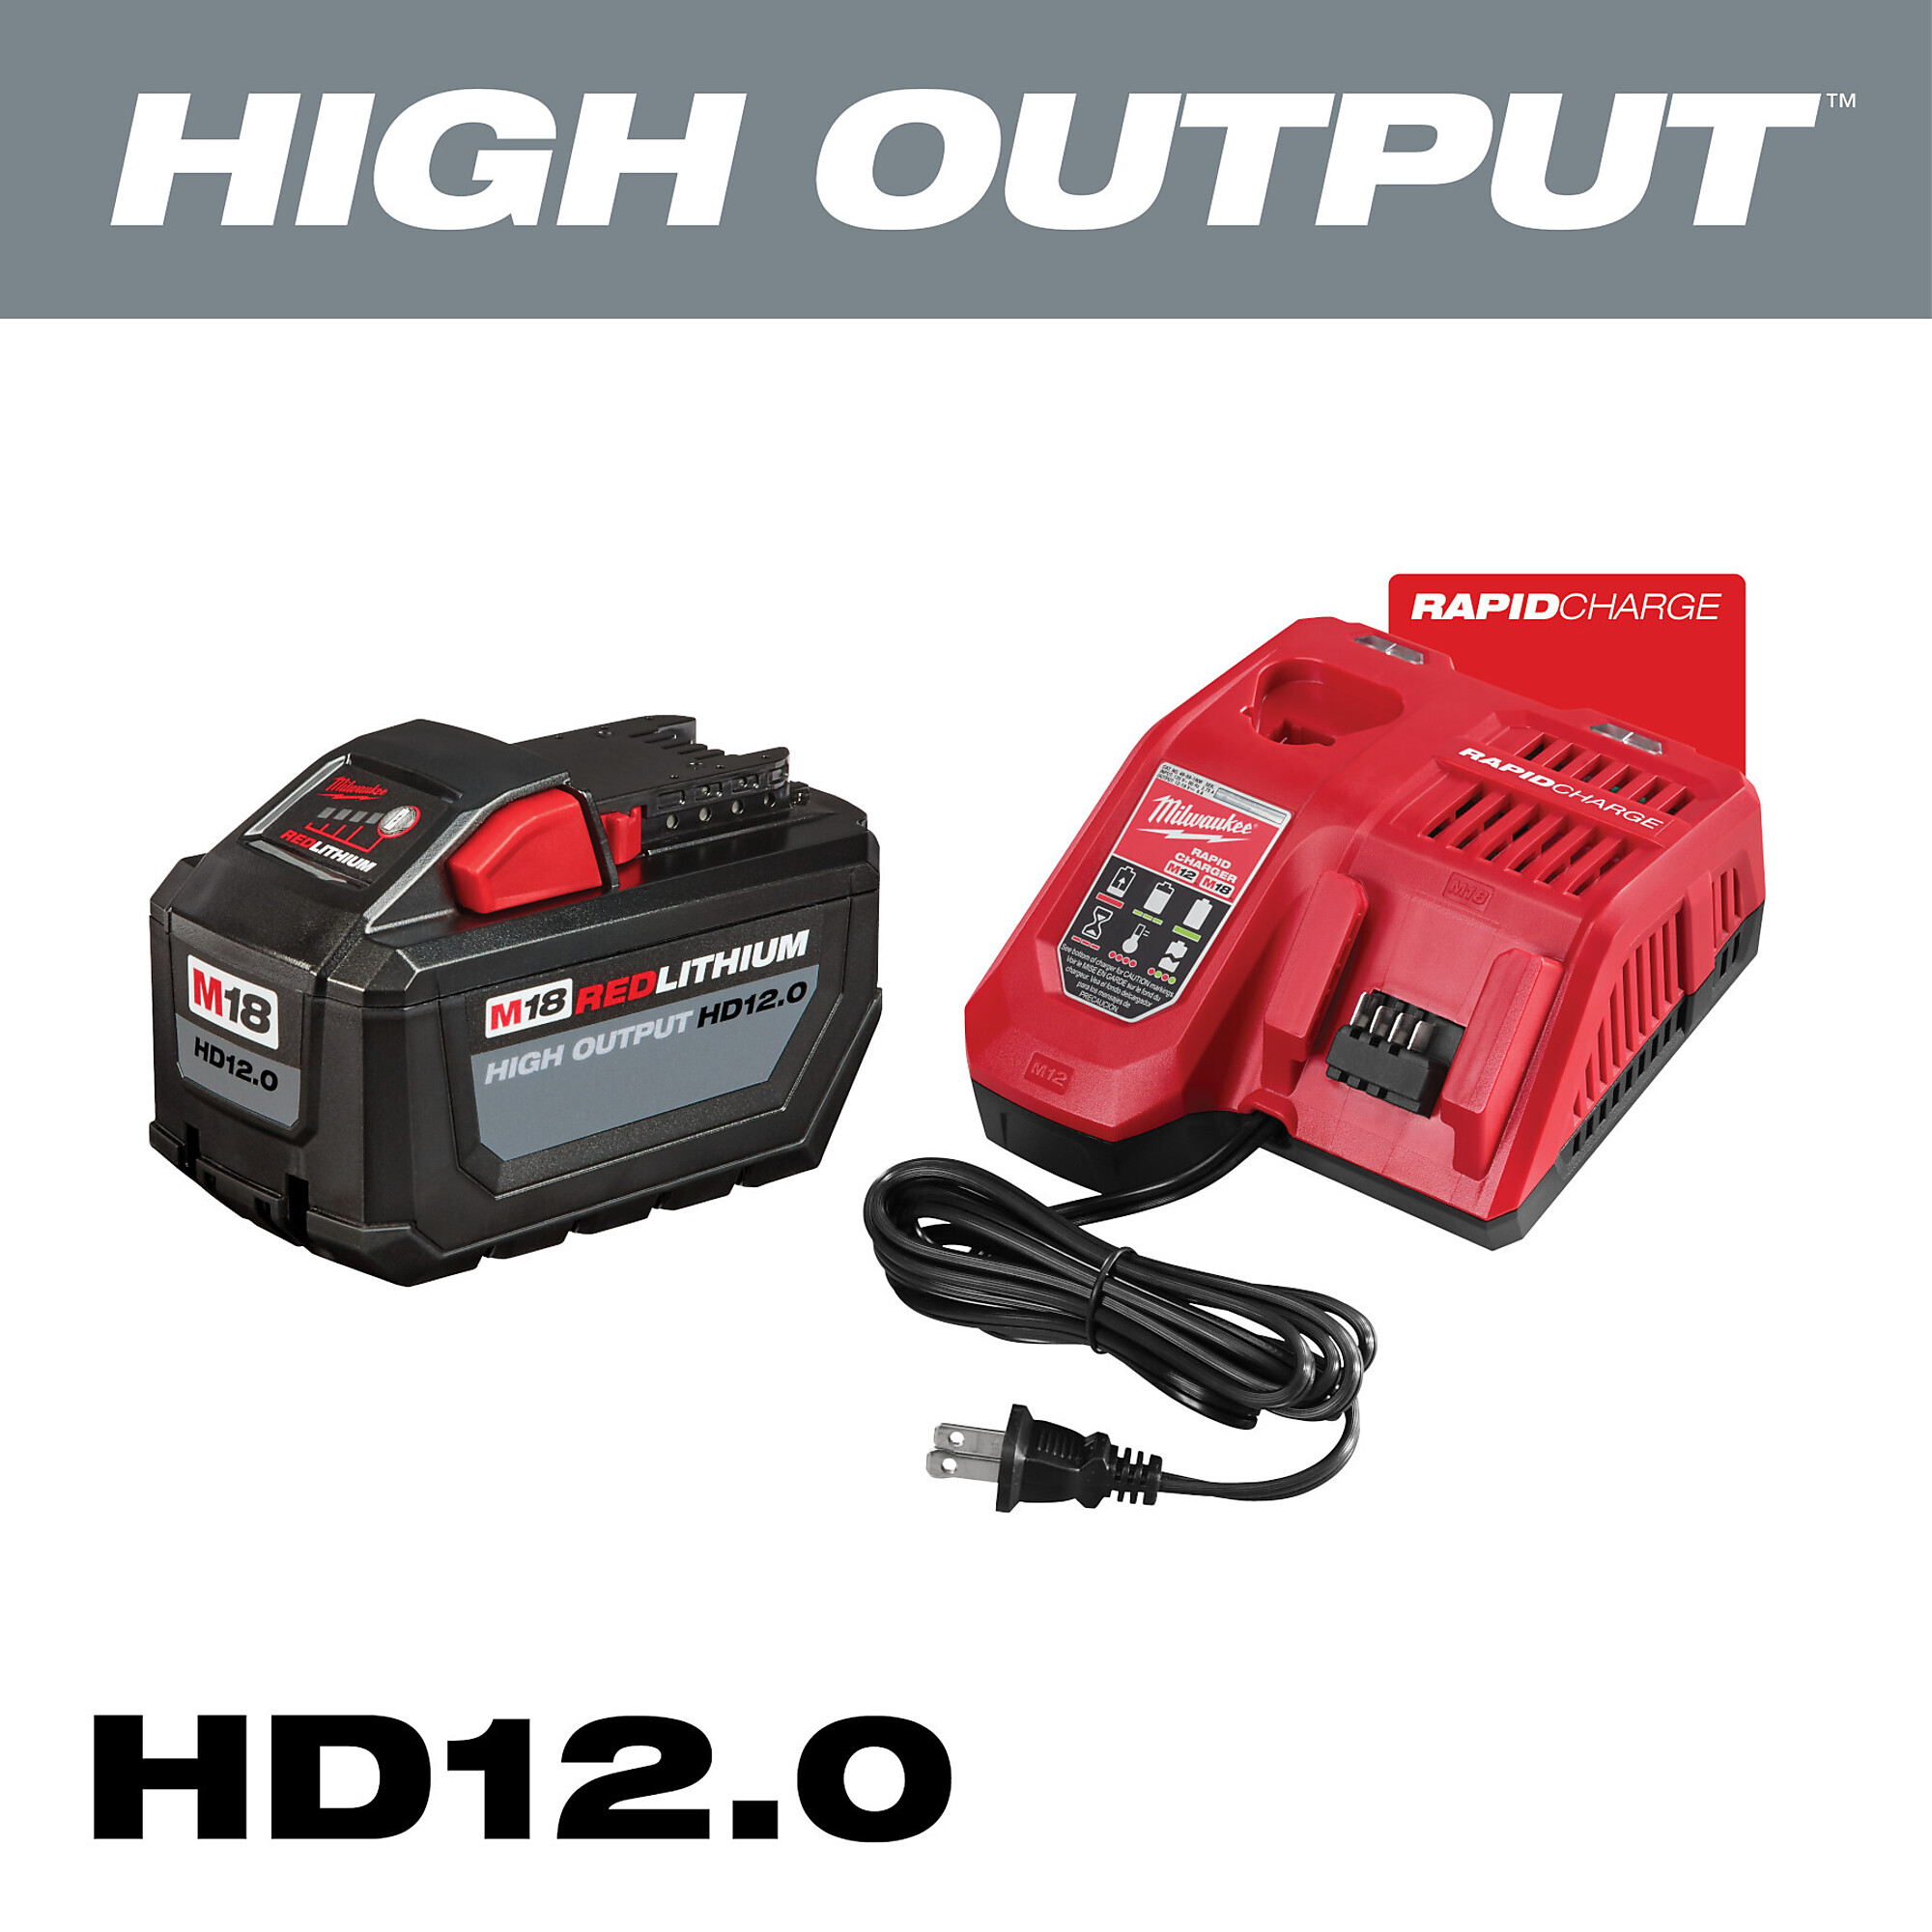 Milwaukee M18 REDLITHIUM High Output HD12.0 Battery Pack and Multi-Voltage Charger, Model 48-59-1200